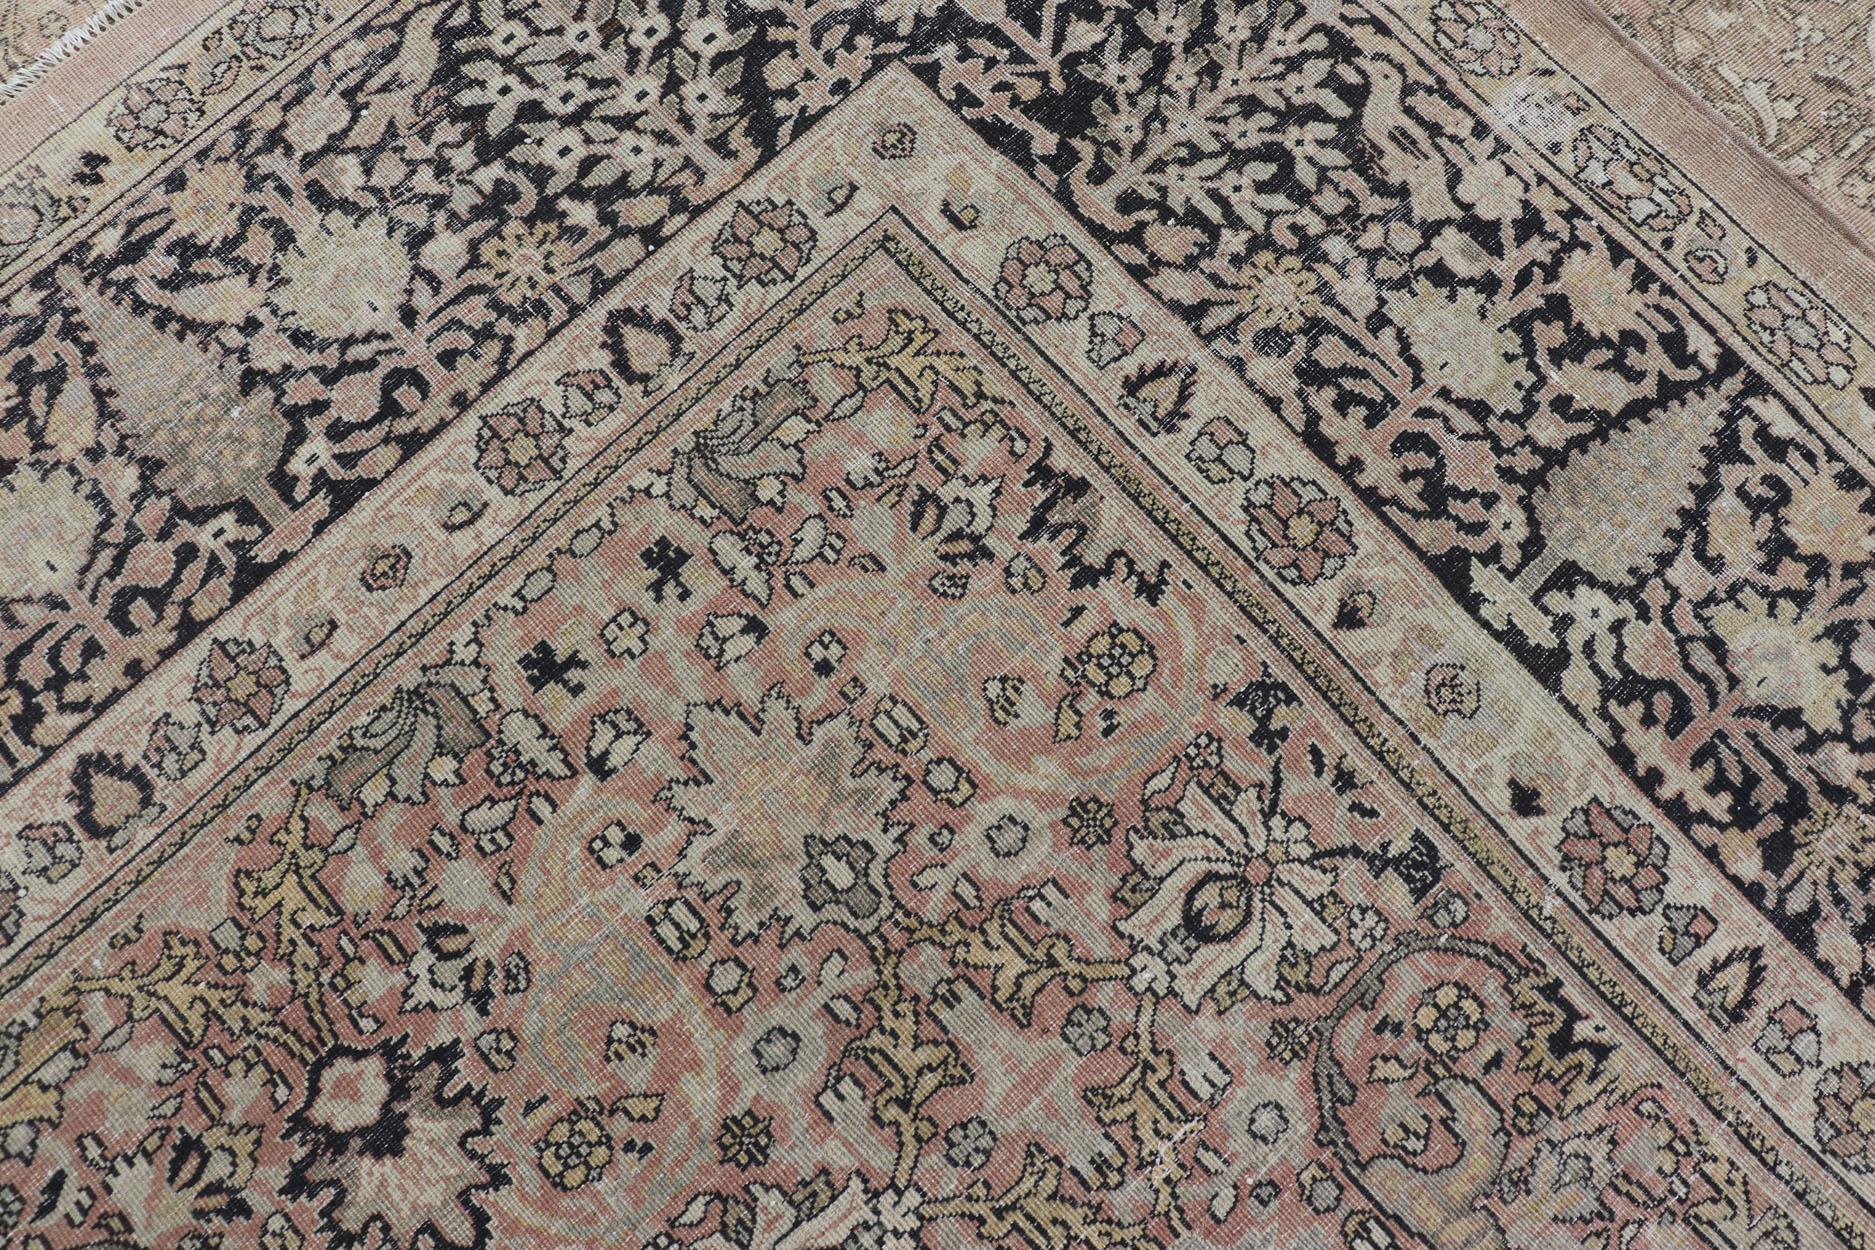 Large Antique Turkish Sivas Rug with Floral Design in Earthy Neutral Tones  For Sale 10